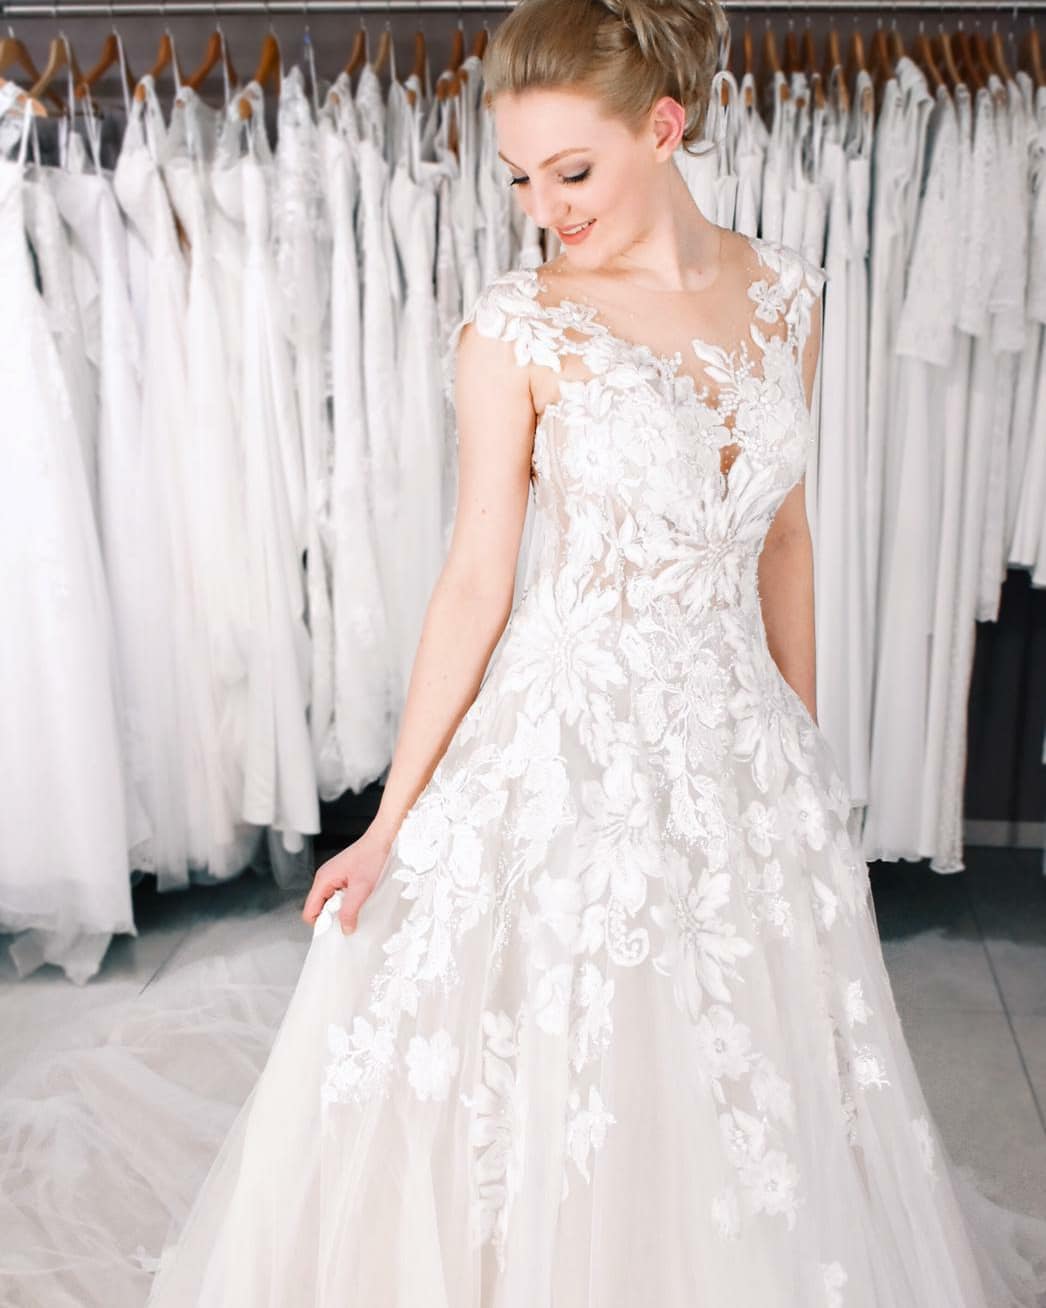 Beautiful A-Line Bateau Floor-length Tulle Wedding Dress With Appliques Lace and Pearls-Wedding Dresses-BallBride